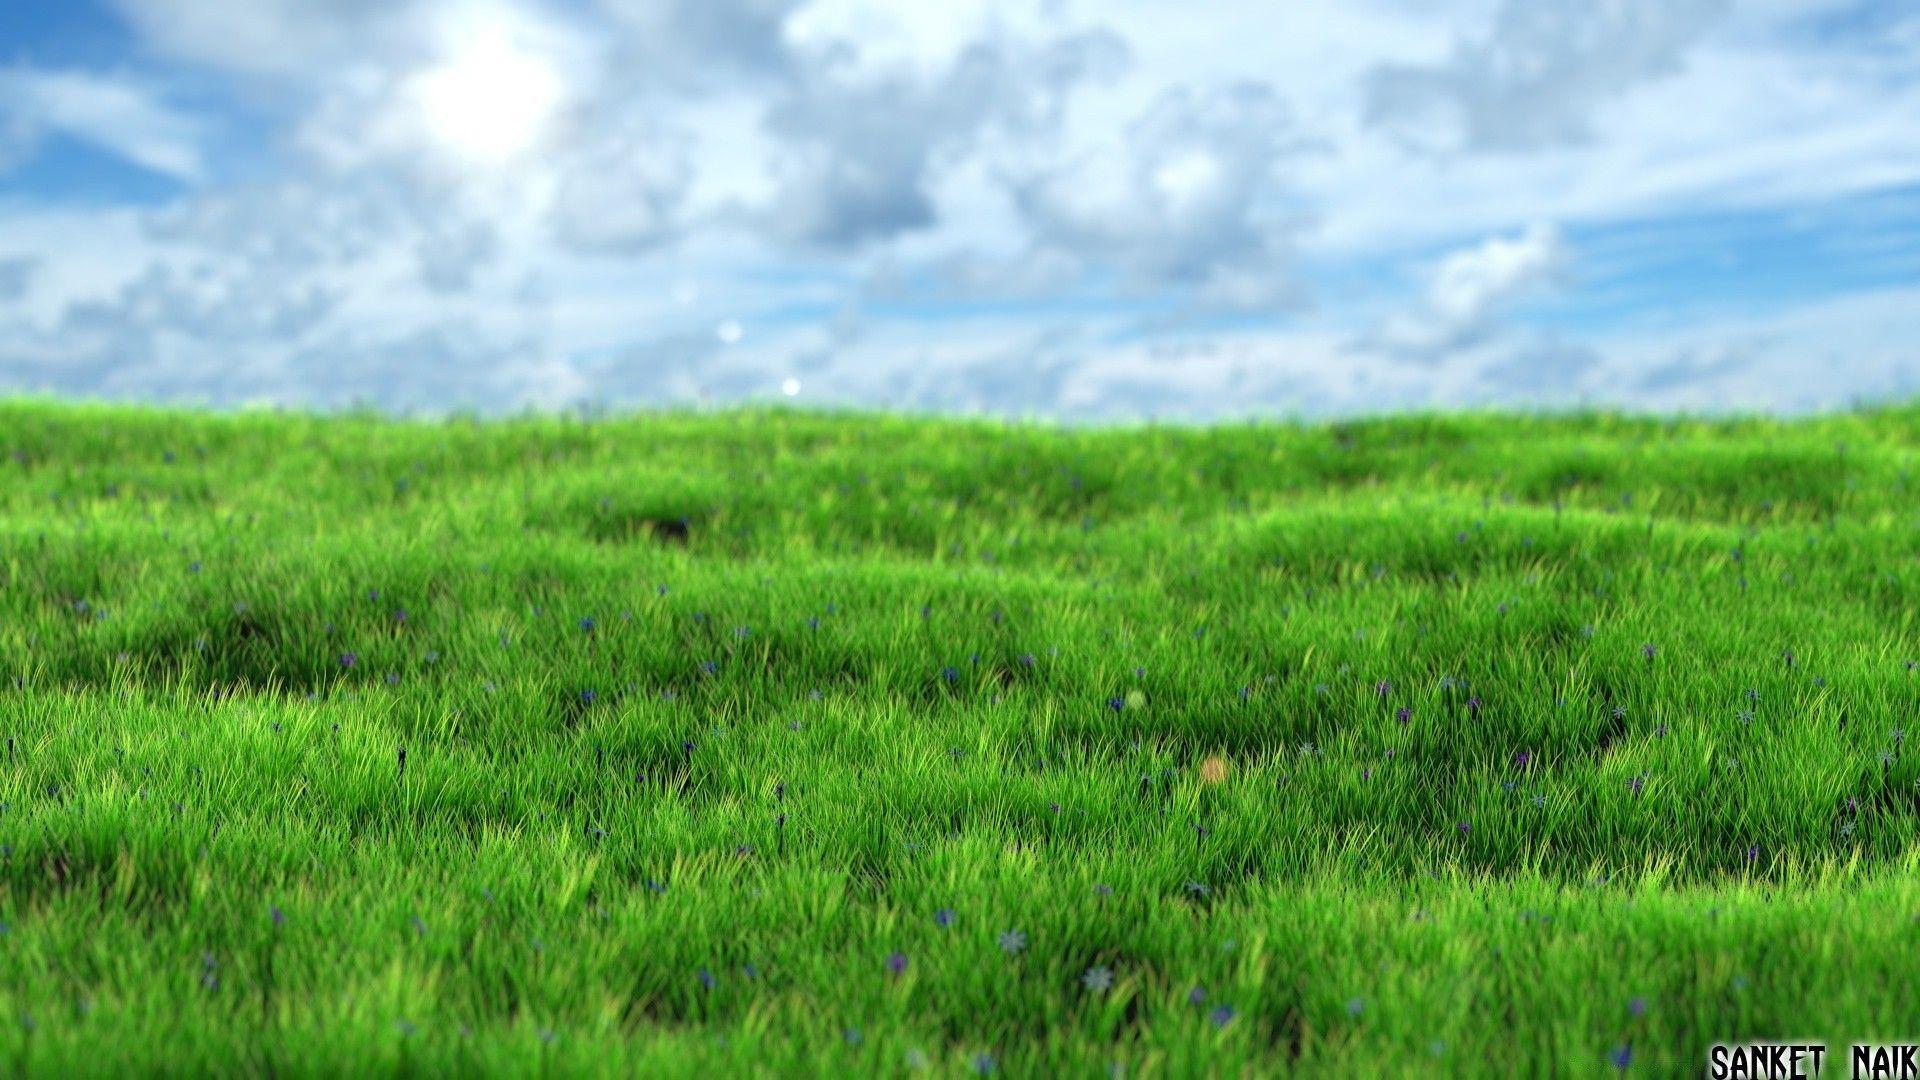 Realistic Grass. Android wallpaper for free